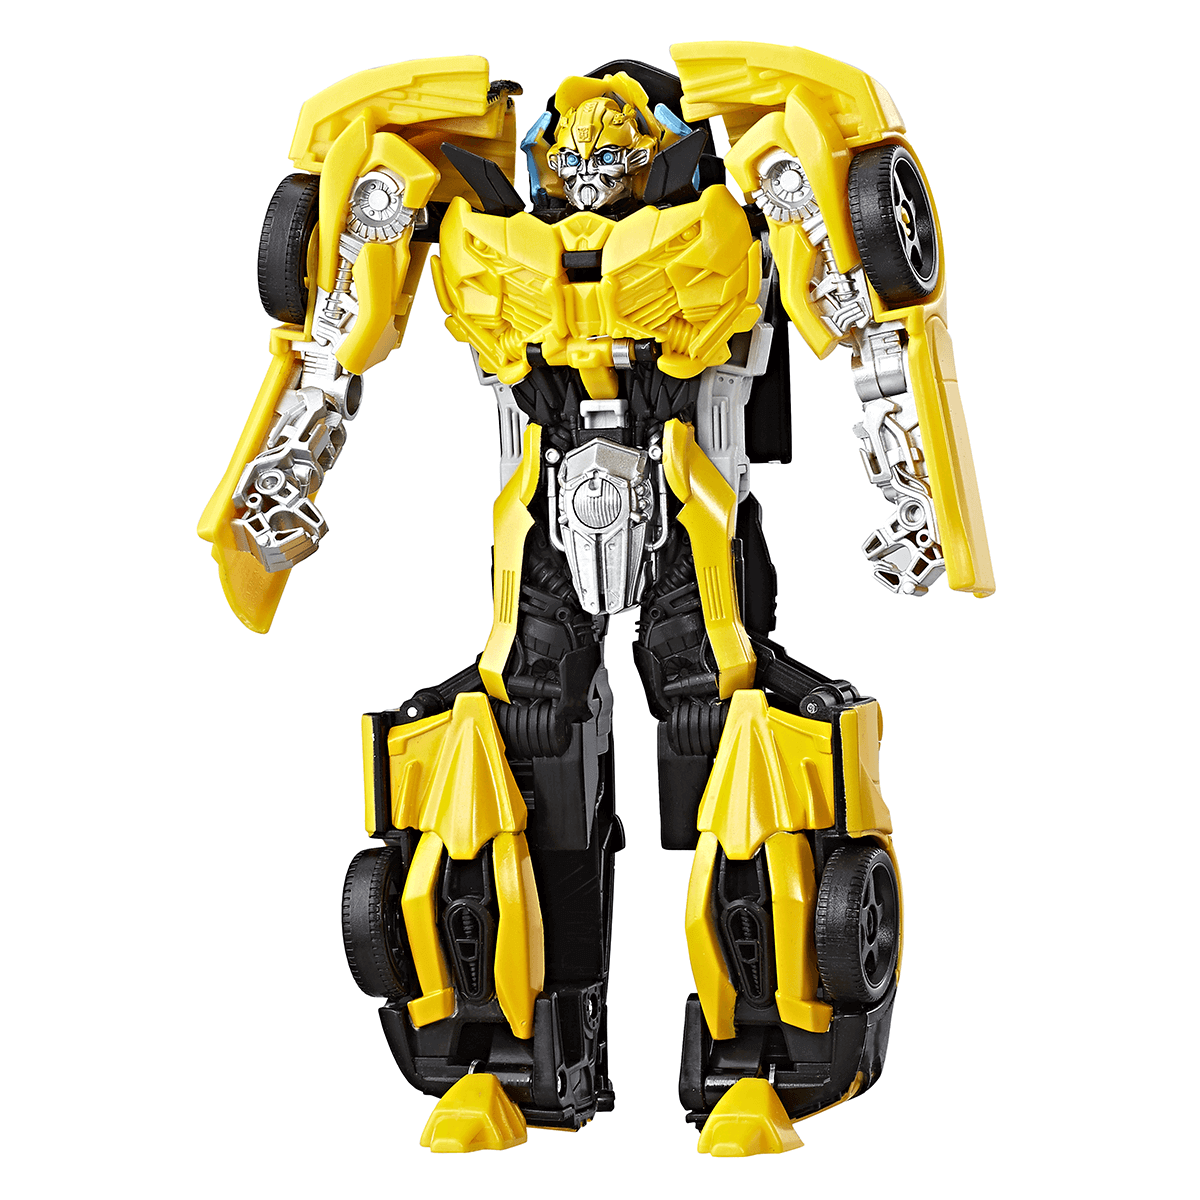  Transformers: The Last Knight 2-Step Turbo Changer Figure - Bumblebee